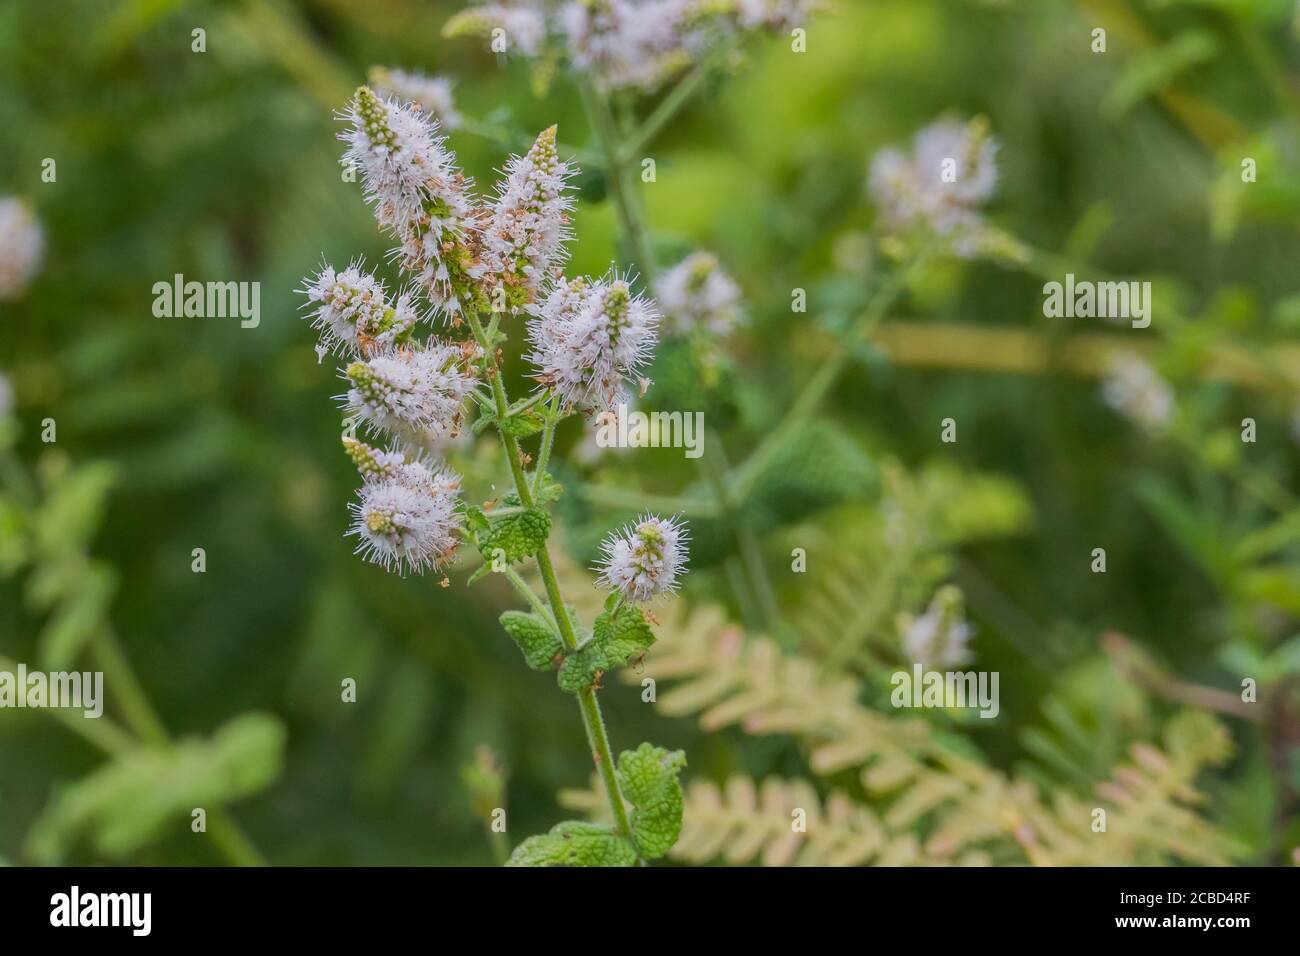 mentha suaveolens flowers from apple mint plant outdoors and daylight summertime Stock Photo